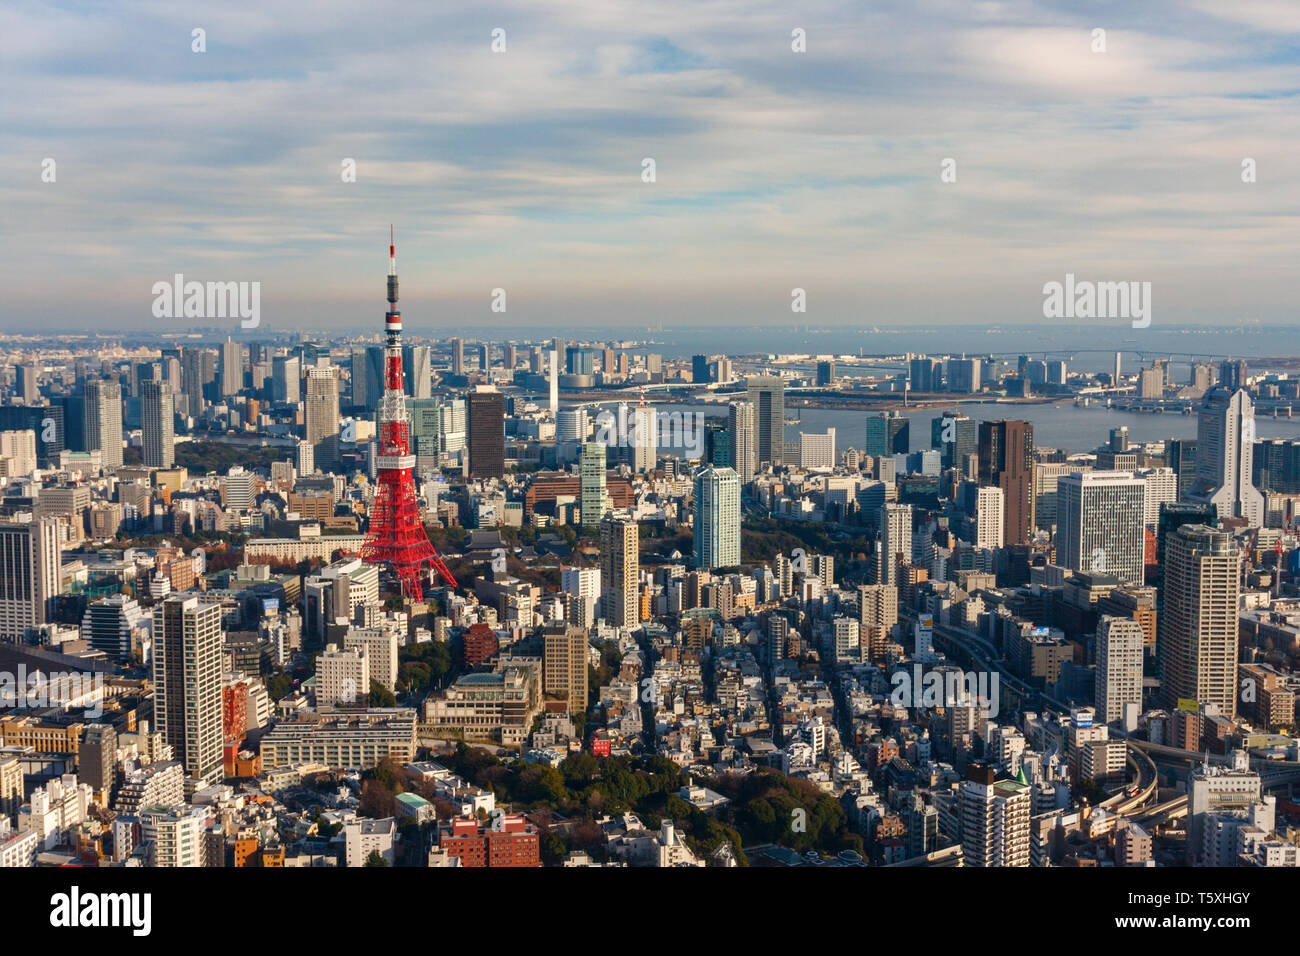 Aerial view of the Tokyo skyline and special ward Minato city with the Tokyo Tower and countless skyscrapers. Japan. Stock Photo